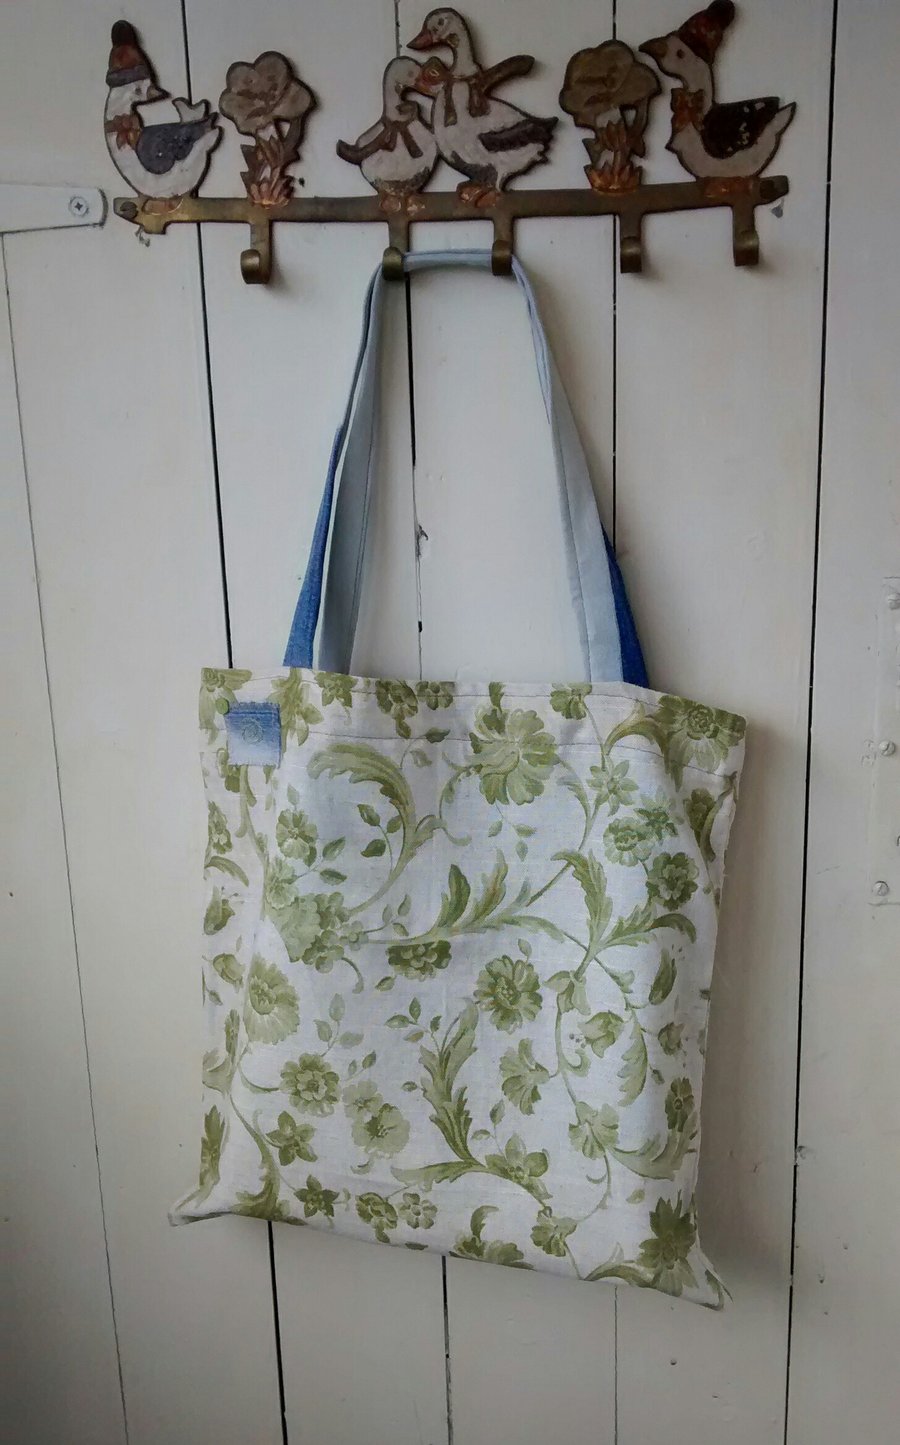 Tote Bag in Floral Fabric - Shopping Bag - Craft Bag